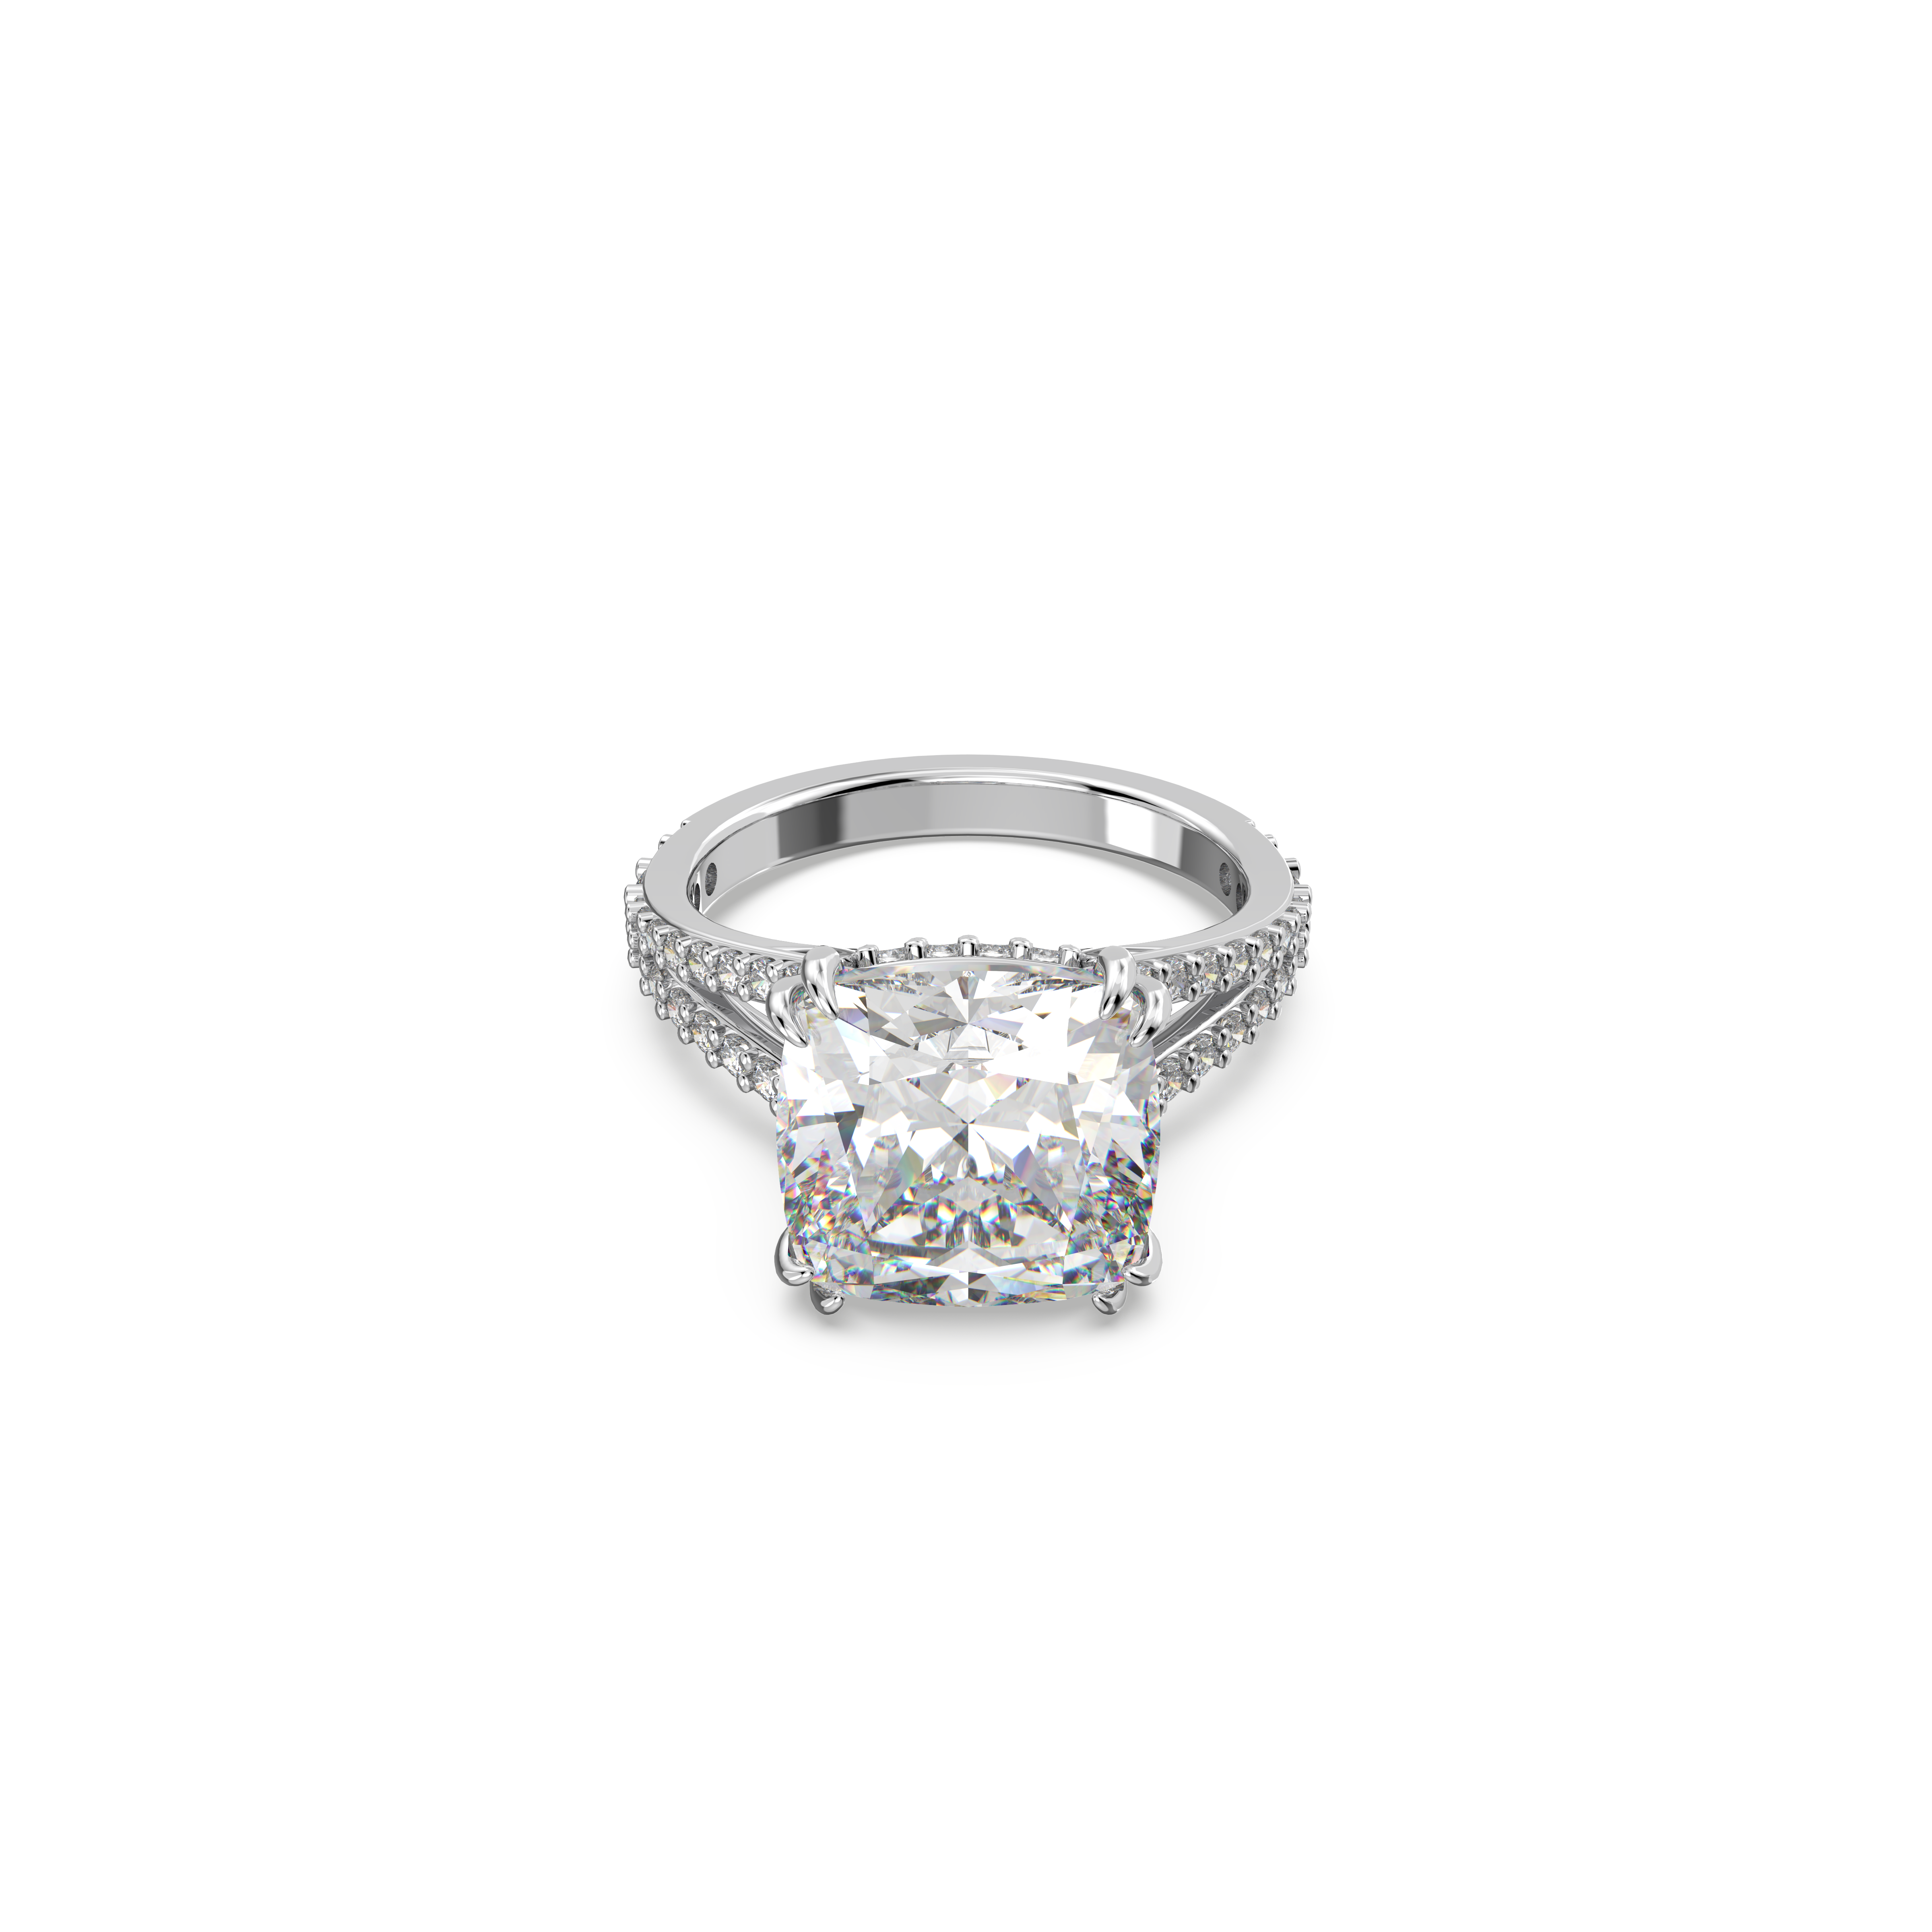 Constella cocktail ring, Square cut, Pavé, White